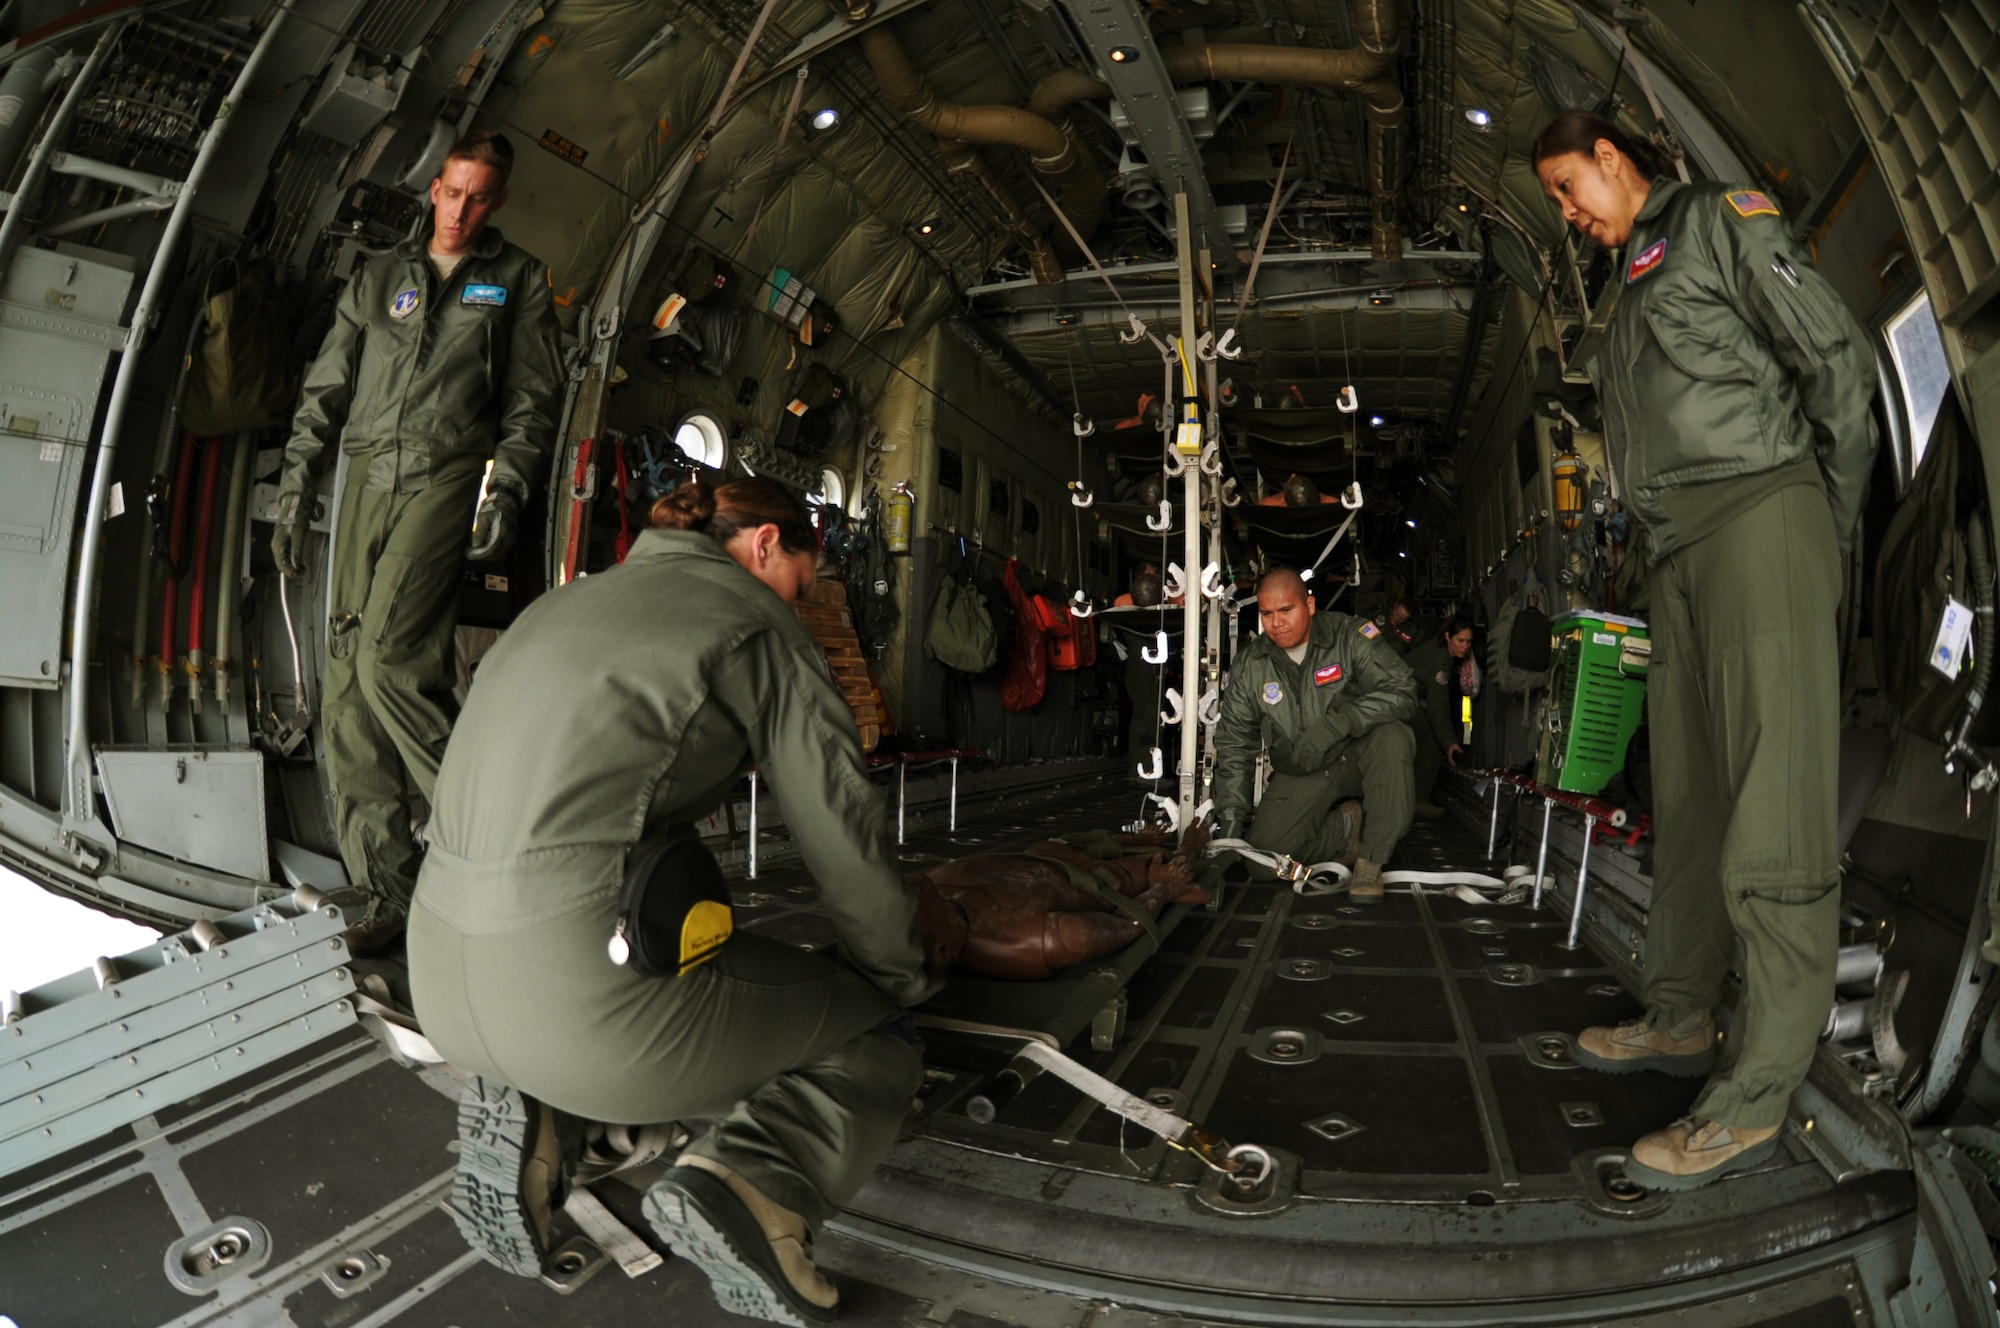 Active duty and Air Force Air National Guard Aeromedical Evacuation members train on a C-130 during a national disaster exercise, Ultimate Caduceus 2014 March 31, 2014. During Ultimate Caduceus, part of the Federal Emergency Management Agency?s National Capstone Exercise, AE members provided medical support, processed and transferred patients. By interacting and working closely with our federal, state and joint partners, Airmen in Utlimate Caduceus 14 are able to develop refinements to processes and procedures that can potentially enhance the effectiveness of real-world relief operations. The aeromedical teams were comprised of more than 18 AE crew members from Pope Army Airfield, N.C., Scott AFB, Ill., and Cheyenne ANG base, Wyo. (U.S. Air Force photo/ Staff Sgt. Stephenie Wade)